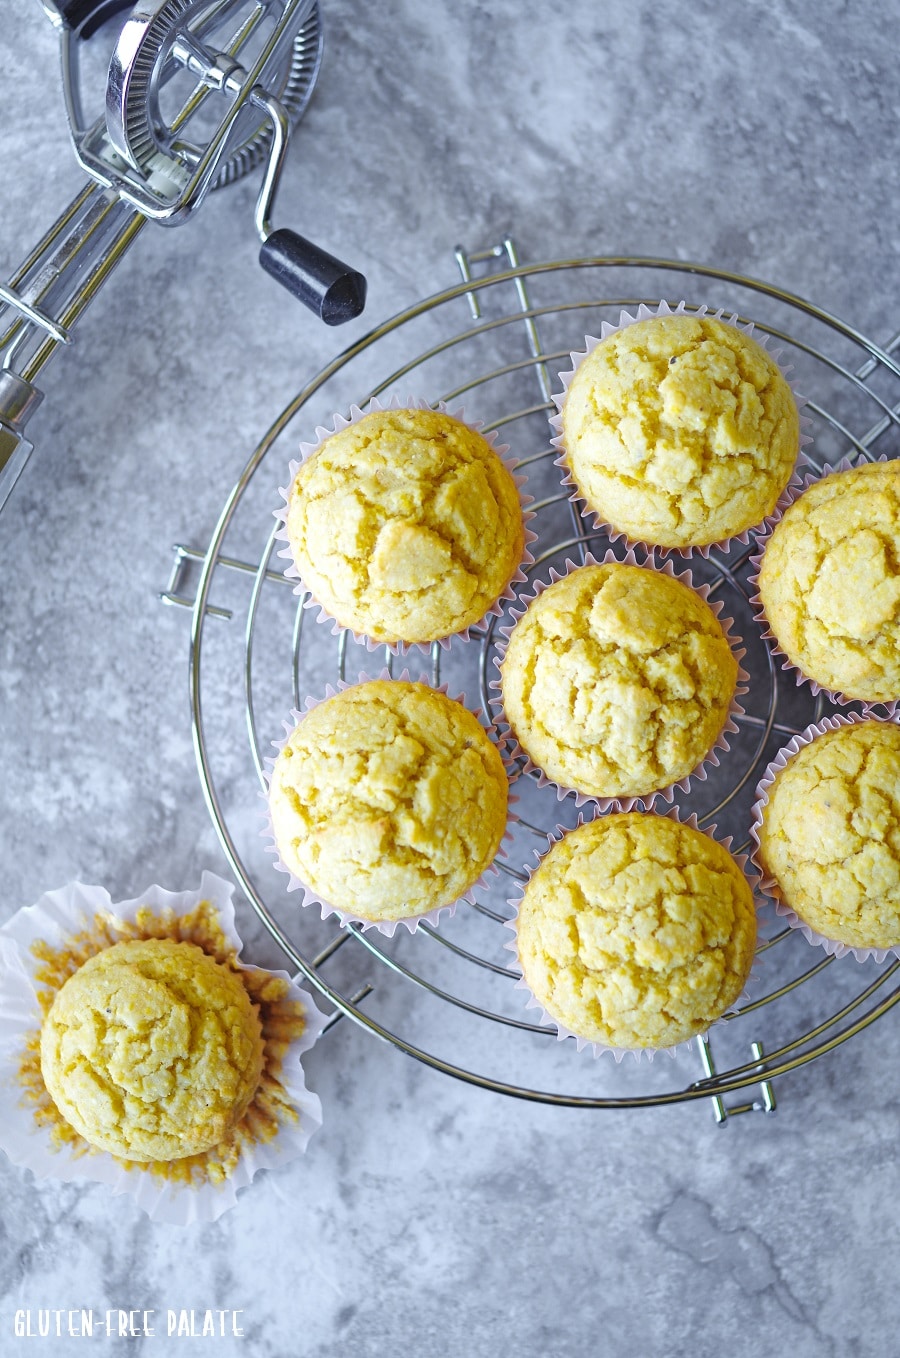 seven gluten-free cornbread muffins on a cooling rack next to a cornbread muffin on the counter